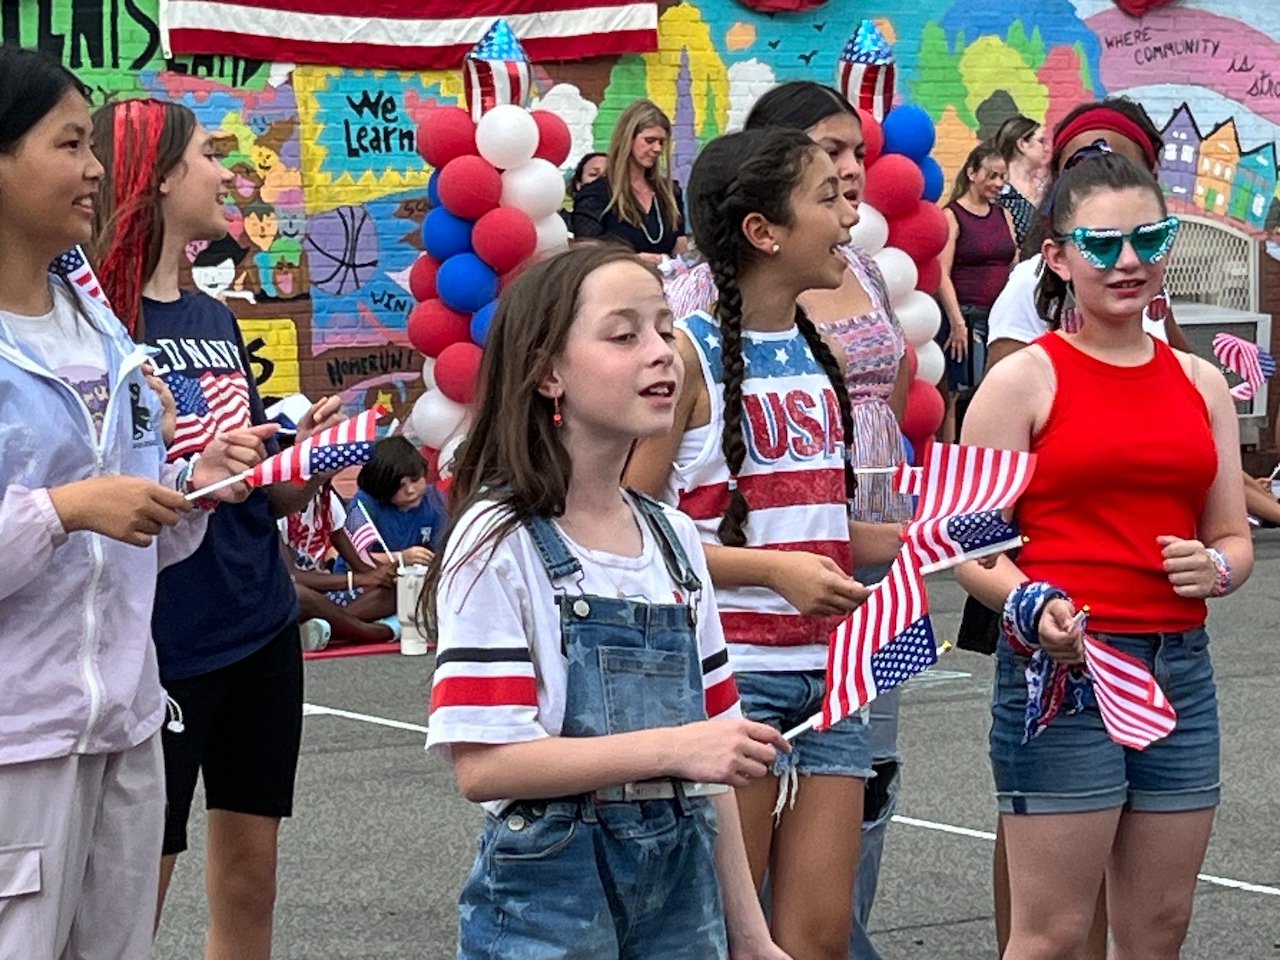 Staten Island celebrates Flag Day: PS 26 the Carteret School hosts big crowd for patriotic event [Video]